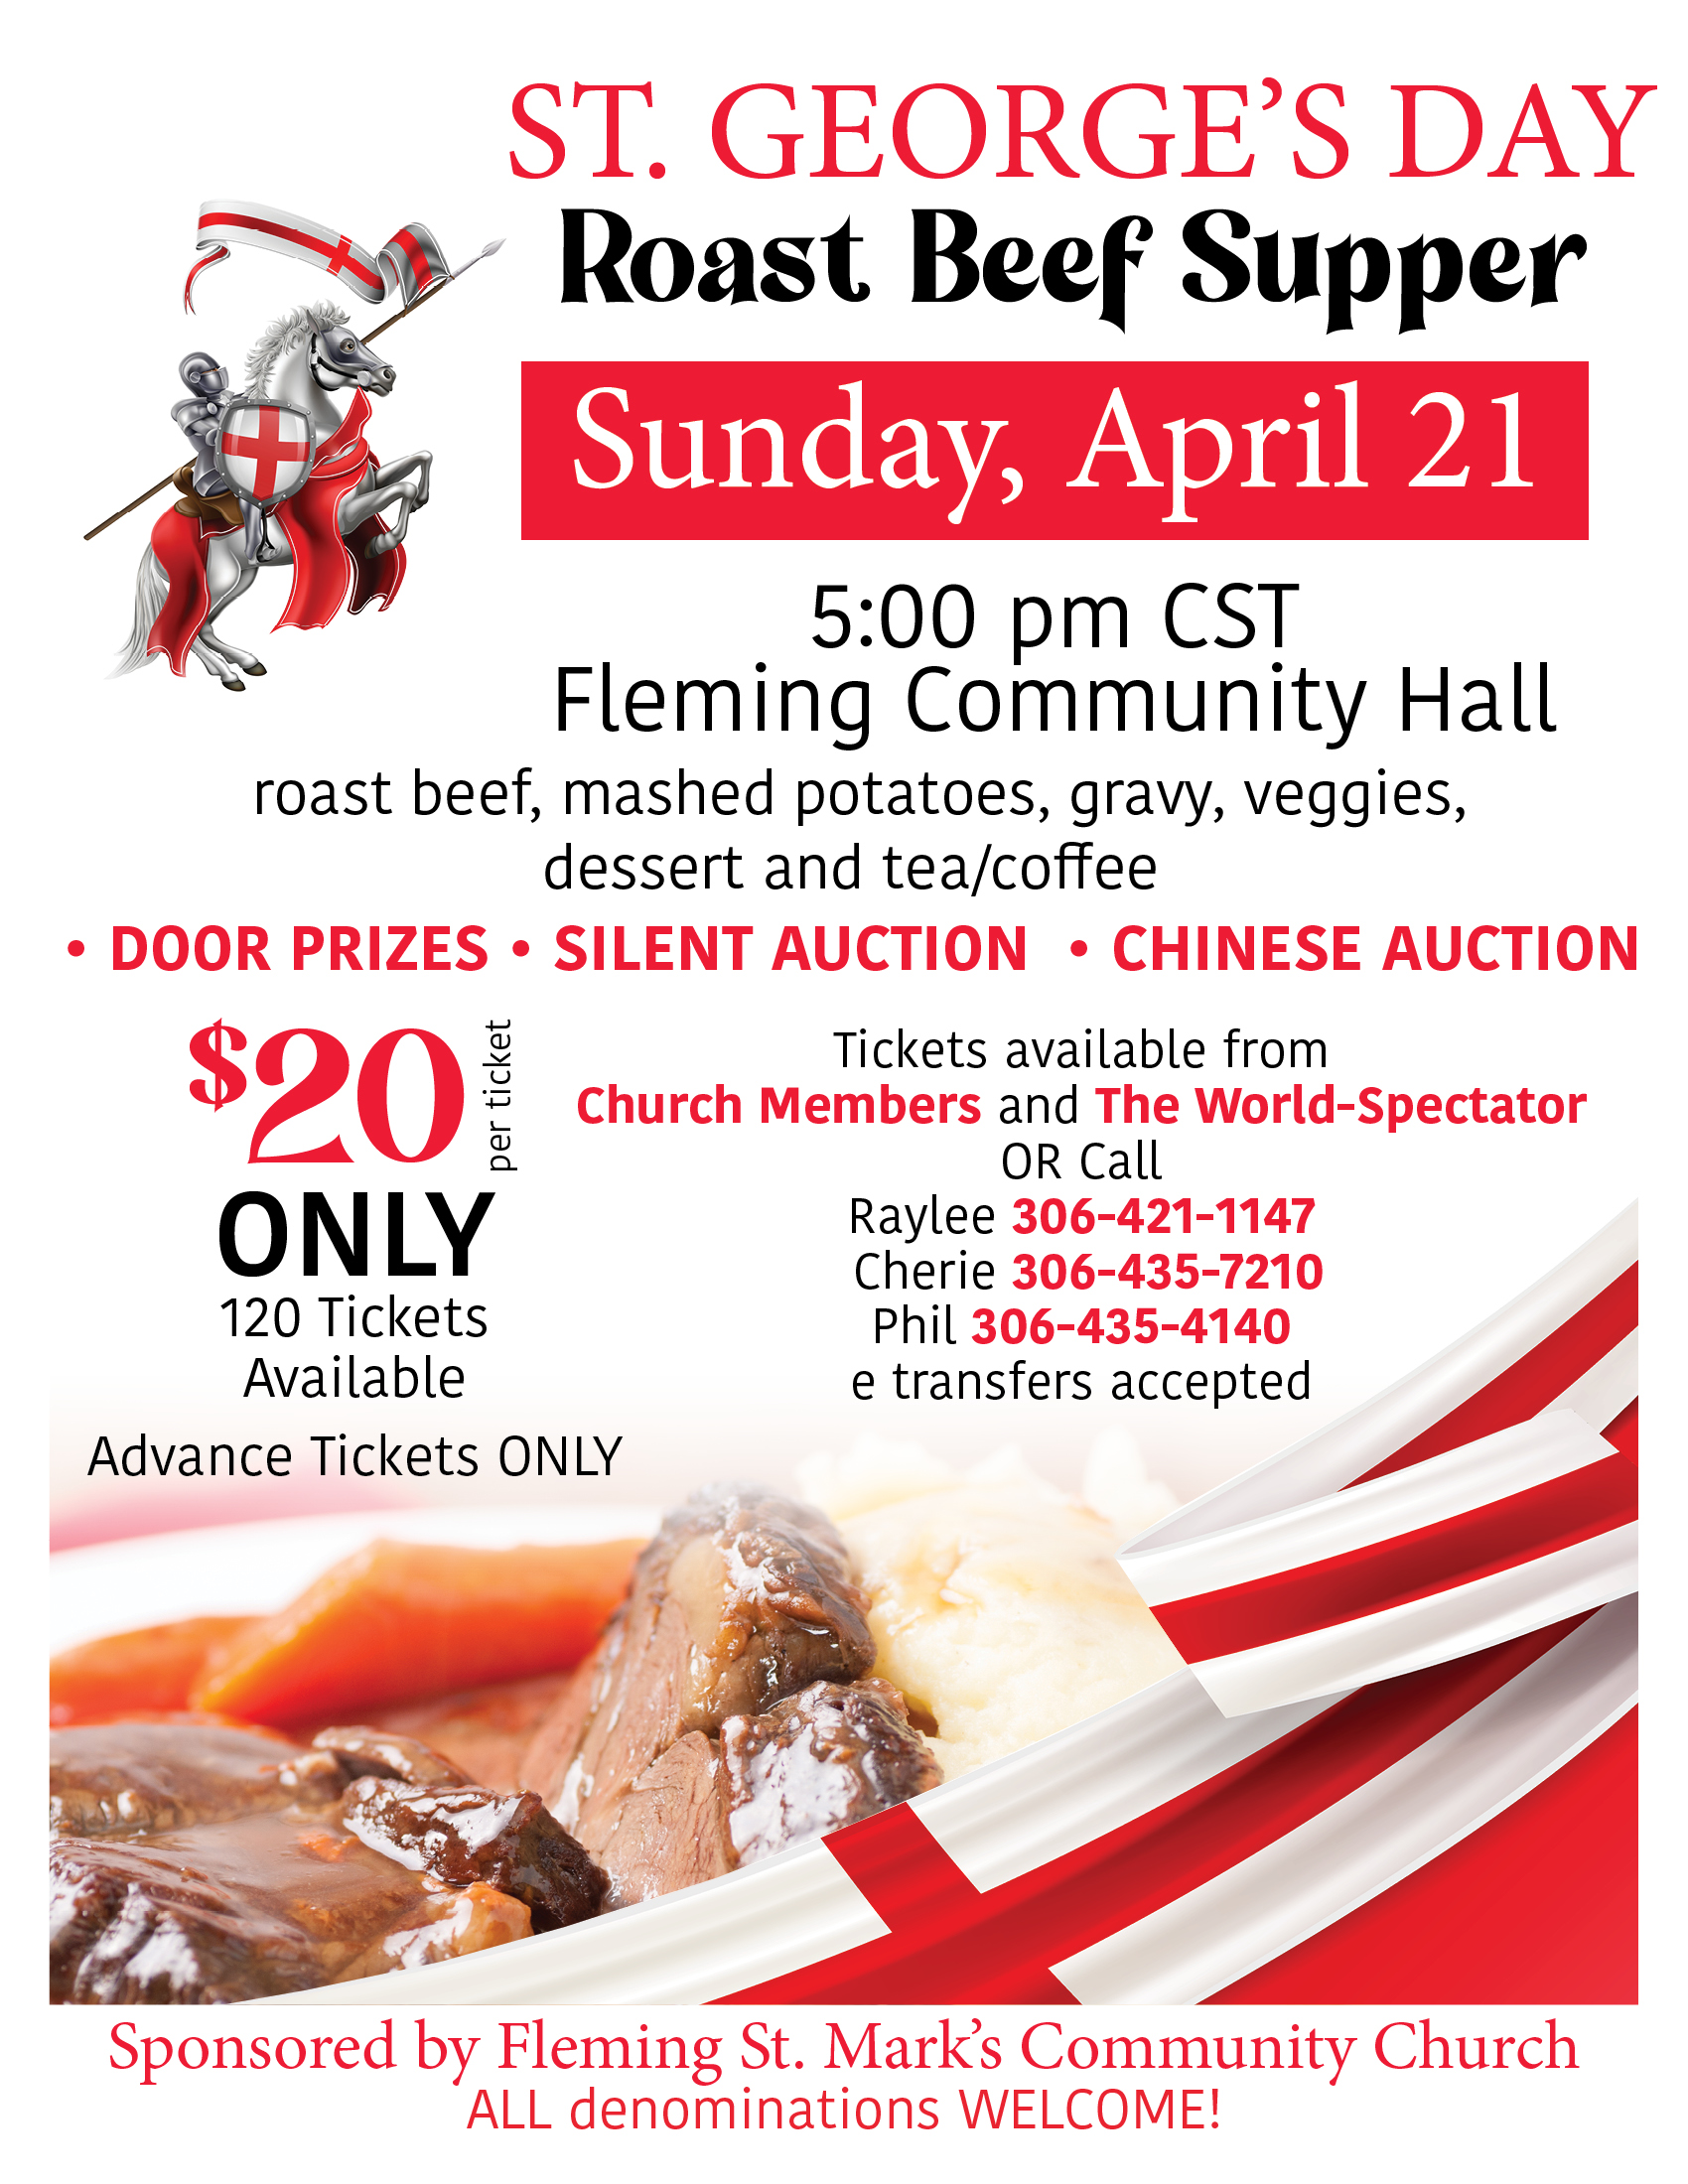 St. George's Day Roast Beef Supper